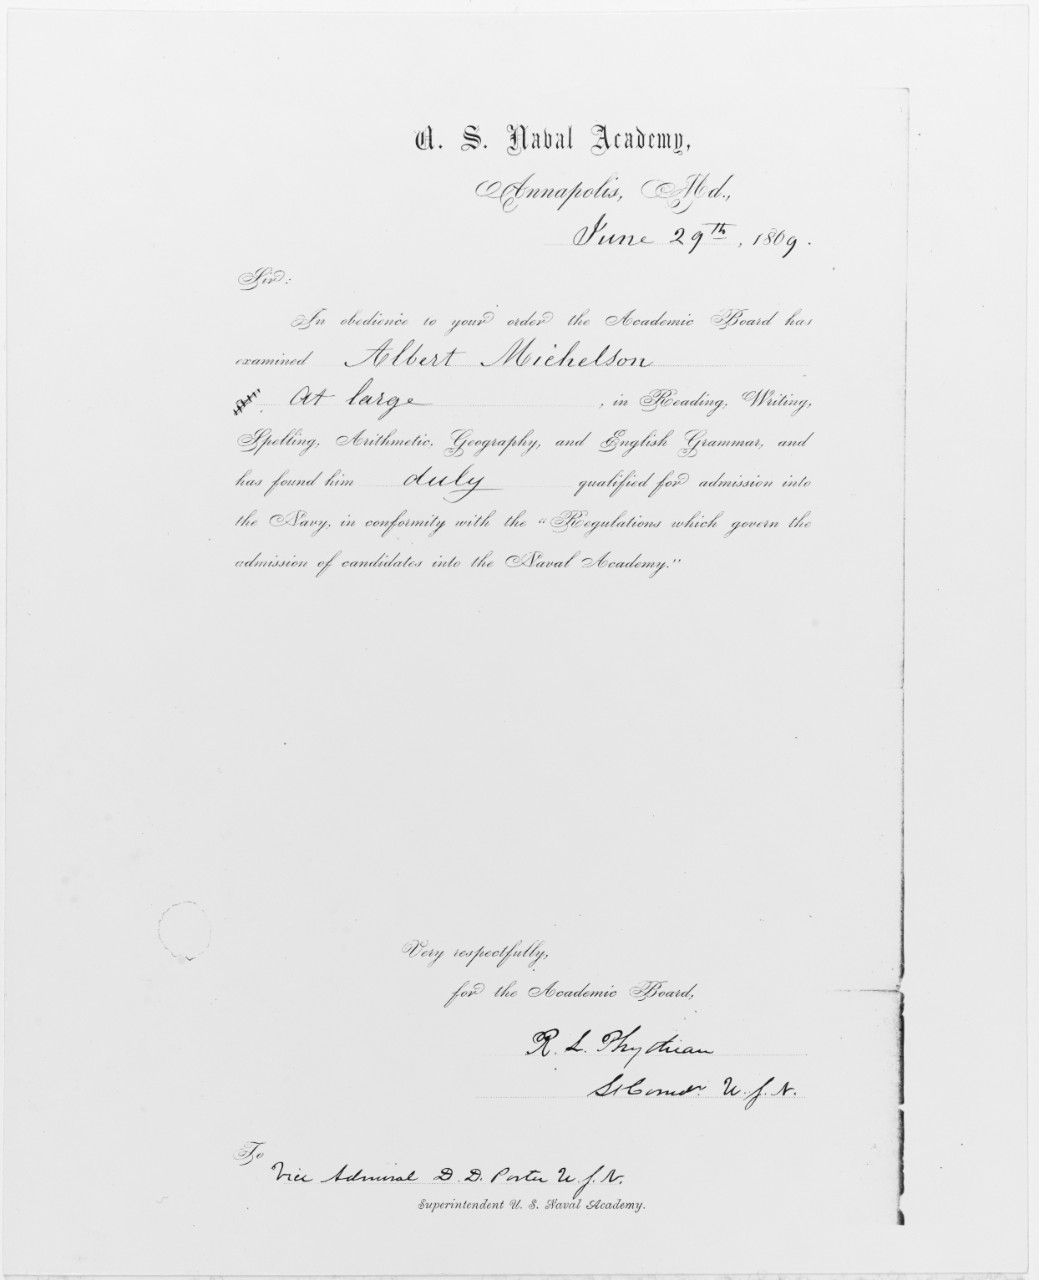 Michelson letter advising him of his qualifying to enter the Naval Academy